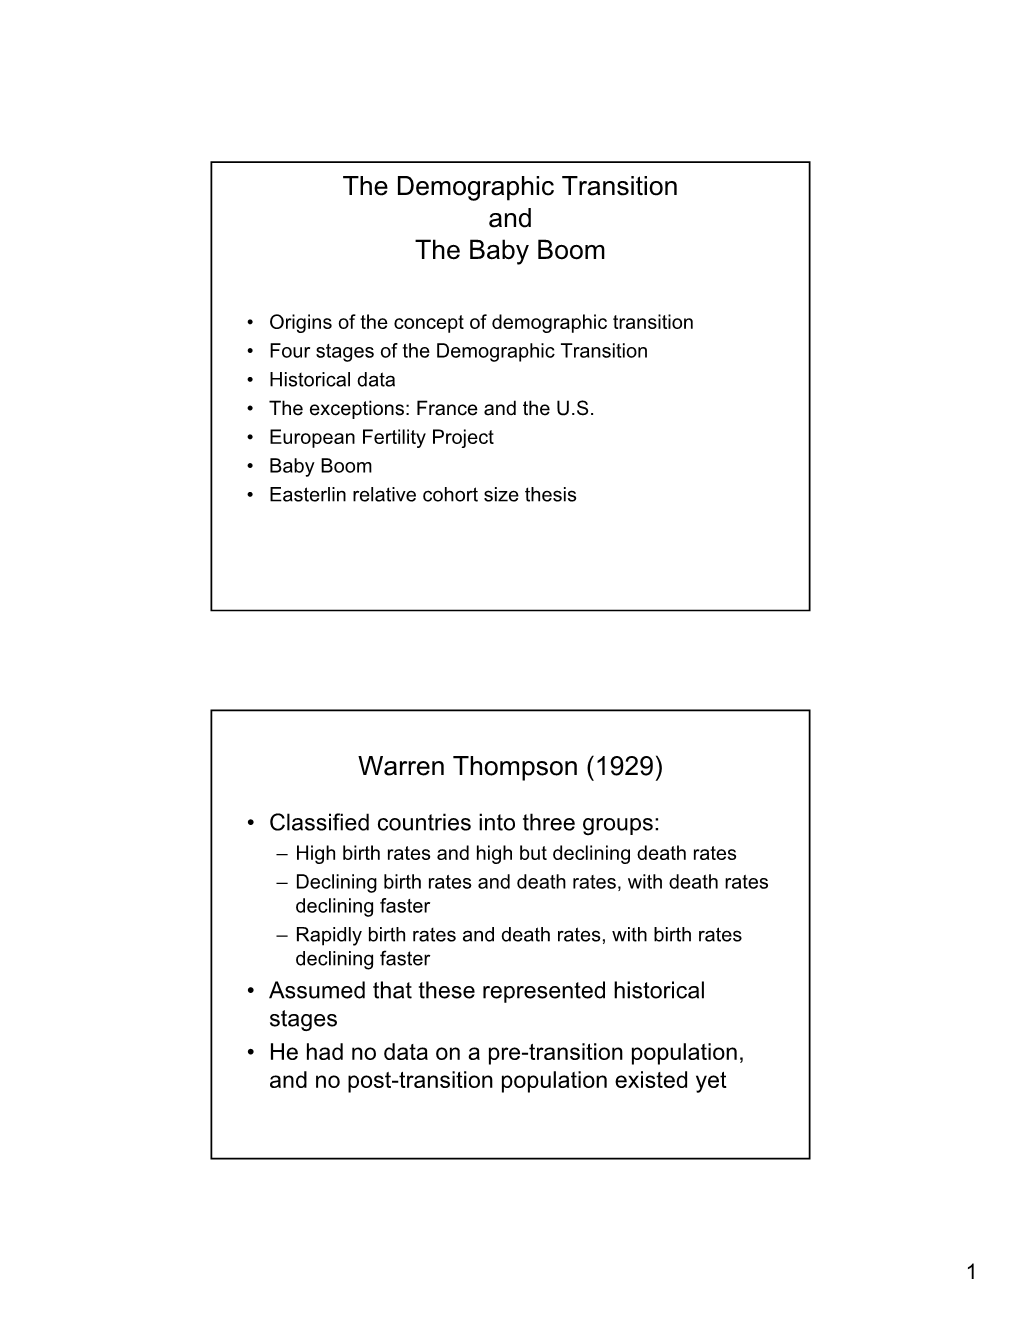 The Demographic Transition and the Baby Boom Warren Thompson (1929)